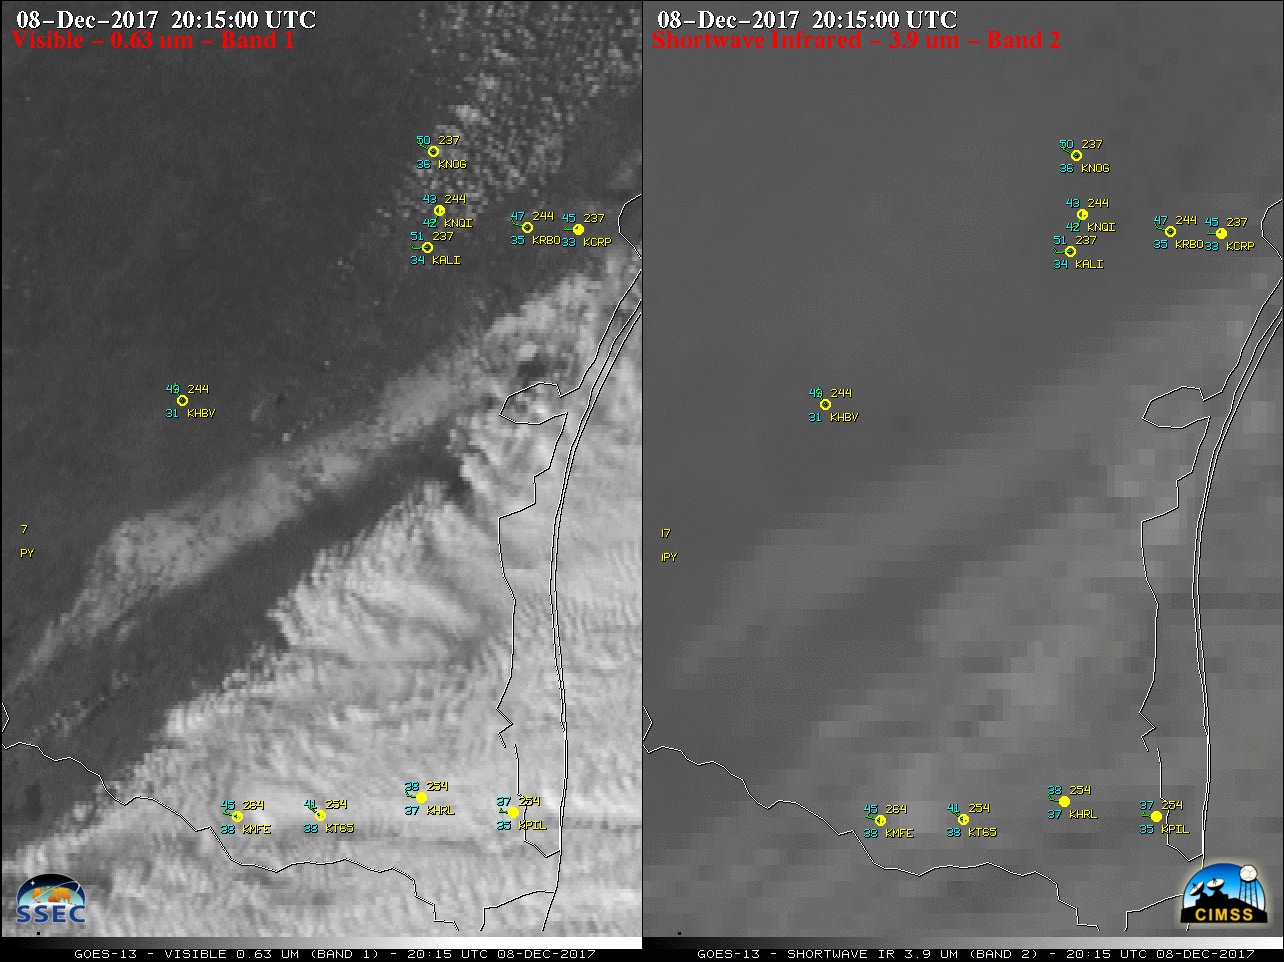 GOES-13 Visible (0.63 µm, left) and Shortwave Infrared (3.9 µm, right) images, with hourly plots of surface reports [click to play animation]